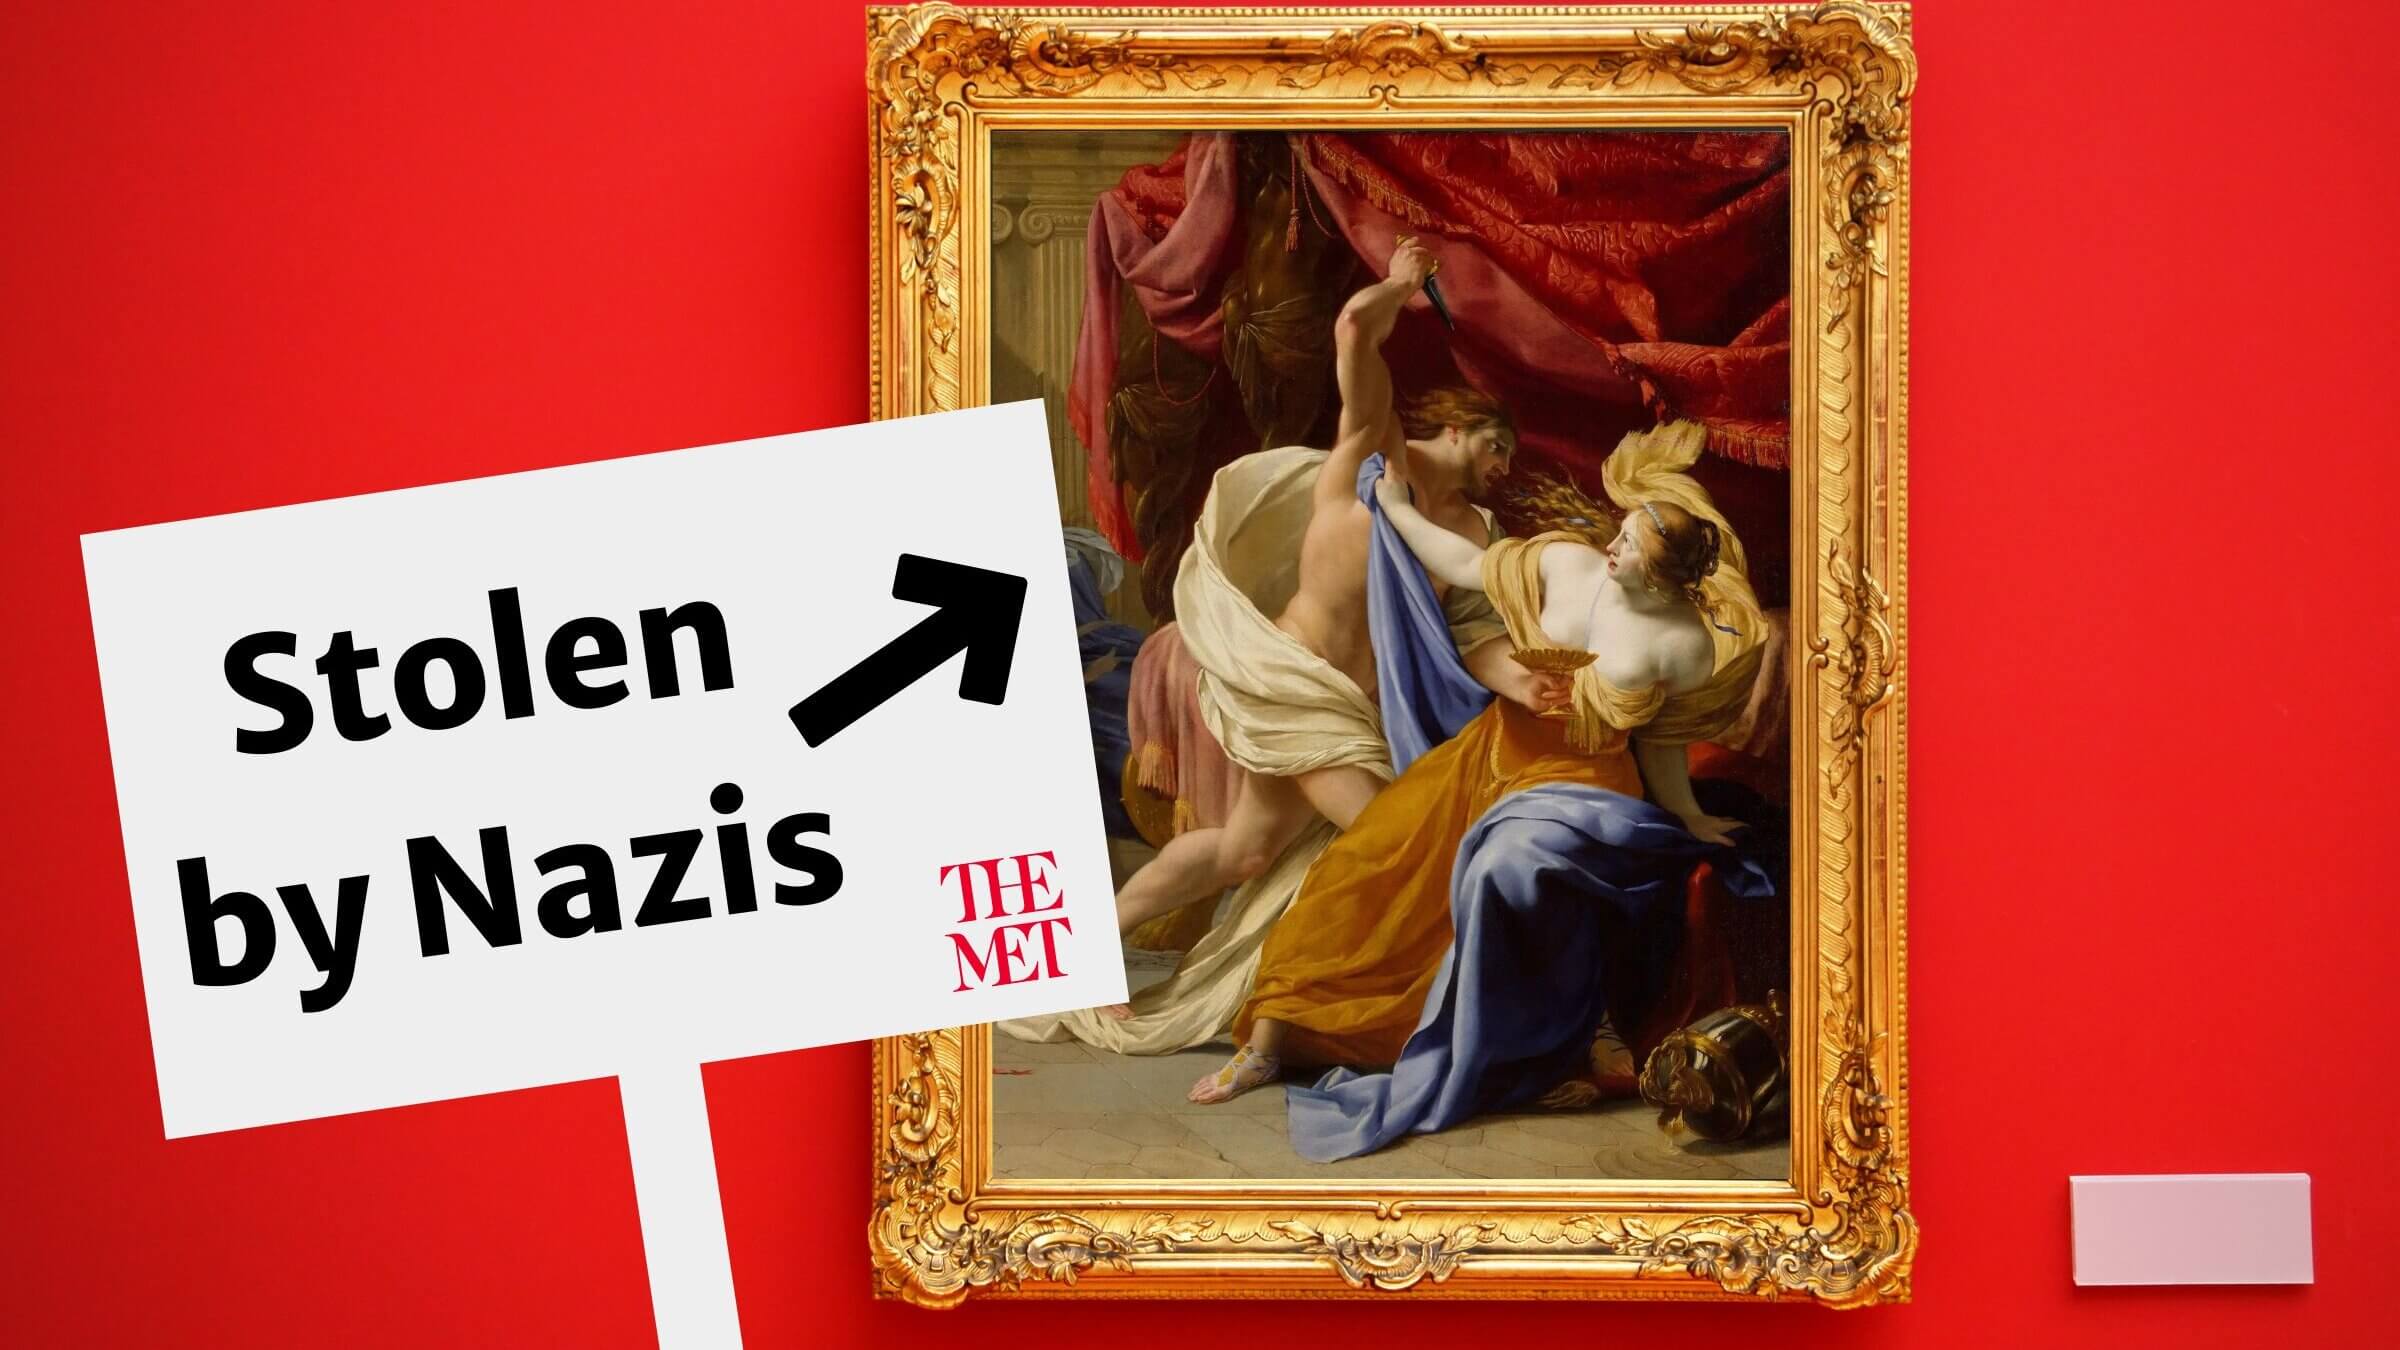 “The Rape of Tamar,” a 17th-century painting attributed to Eustache Le Sueur, is owned by the Met. A <a href="https://www.nytimes.com/2020/02/08/arts/met-art-nazi-loot.html">New York Times investigation</a> revealed in 2020 that it was likely abandoned by Siegfried Aram, a Jewish art dealer, when he fled Nazi Germany in 1933.